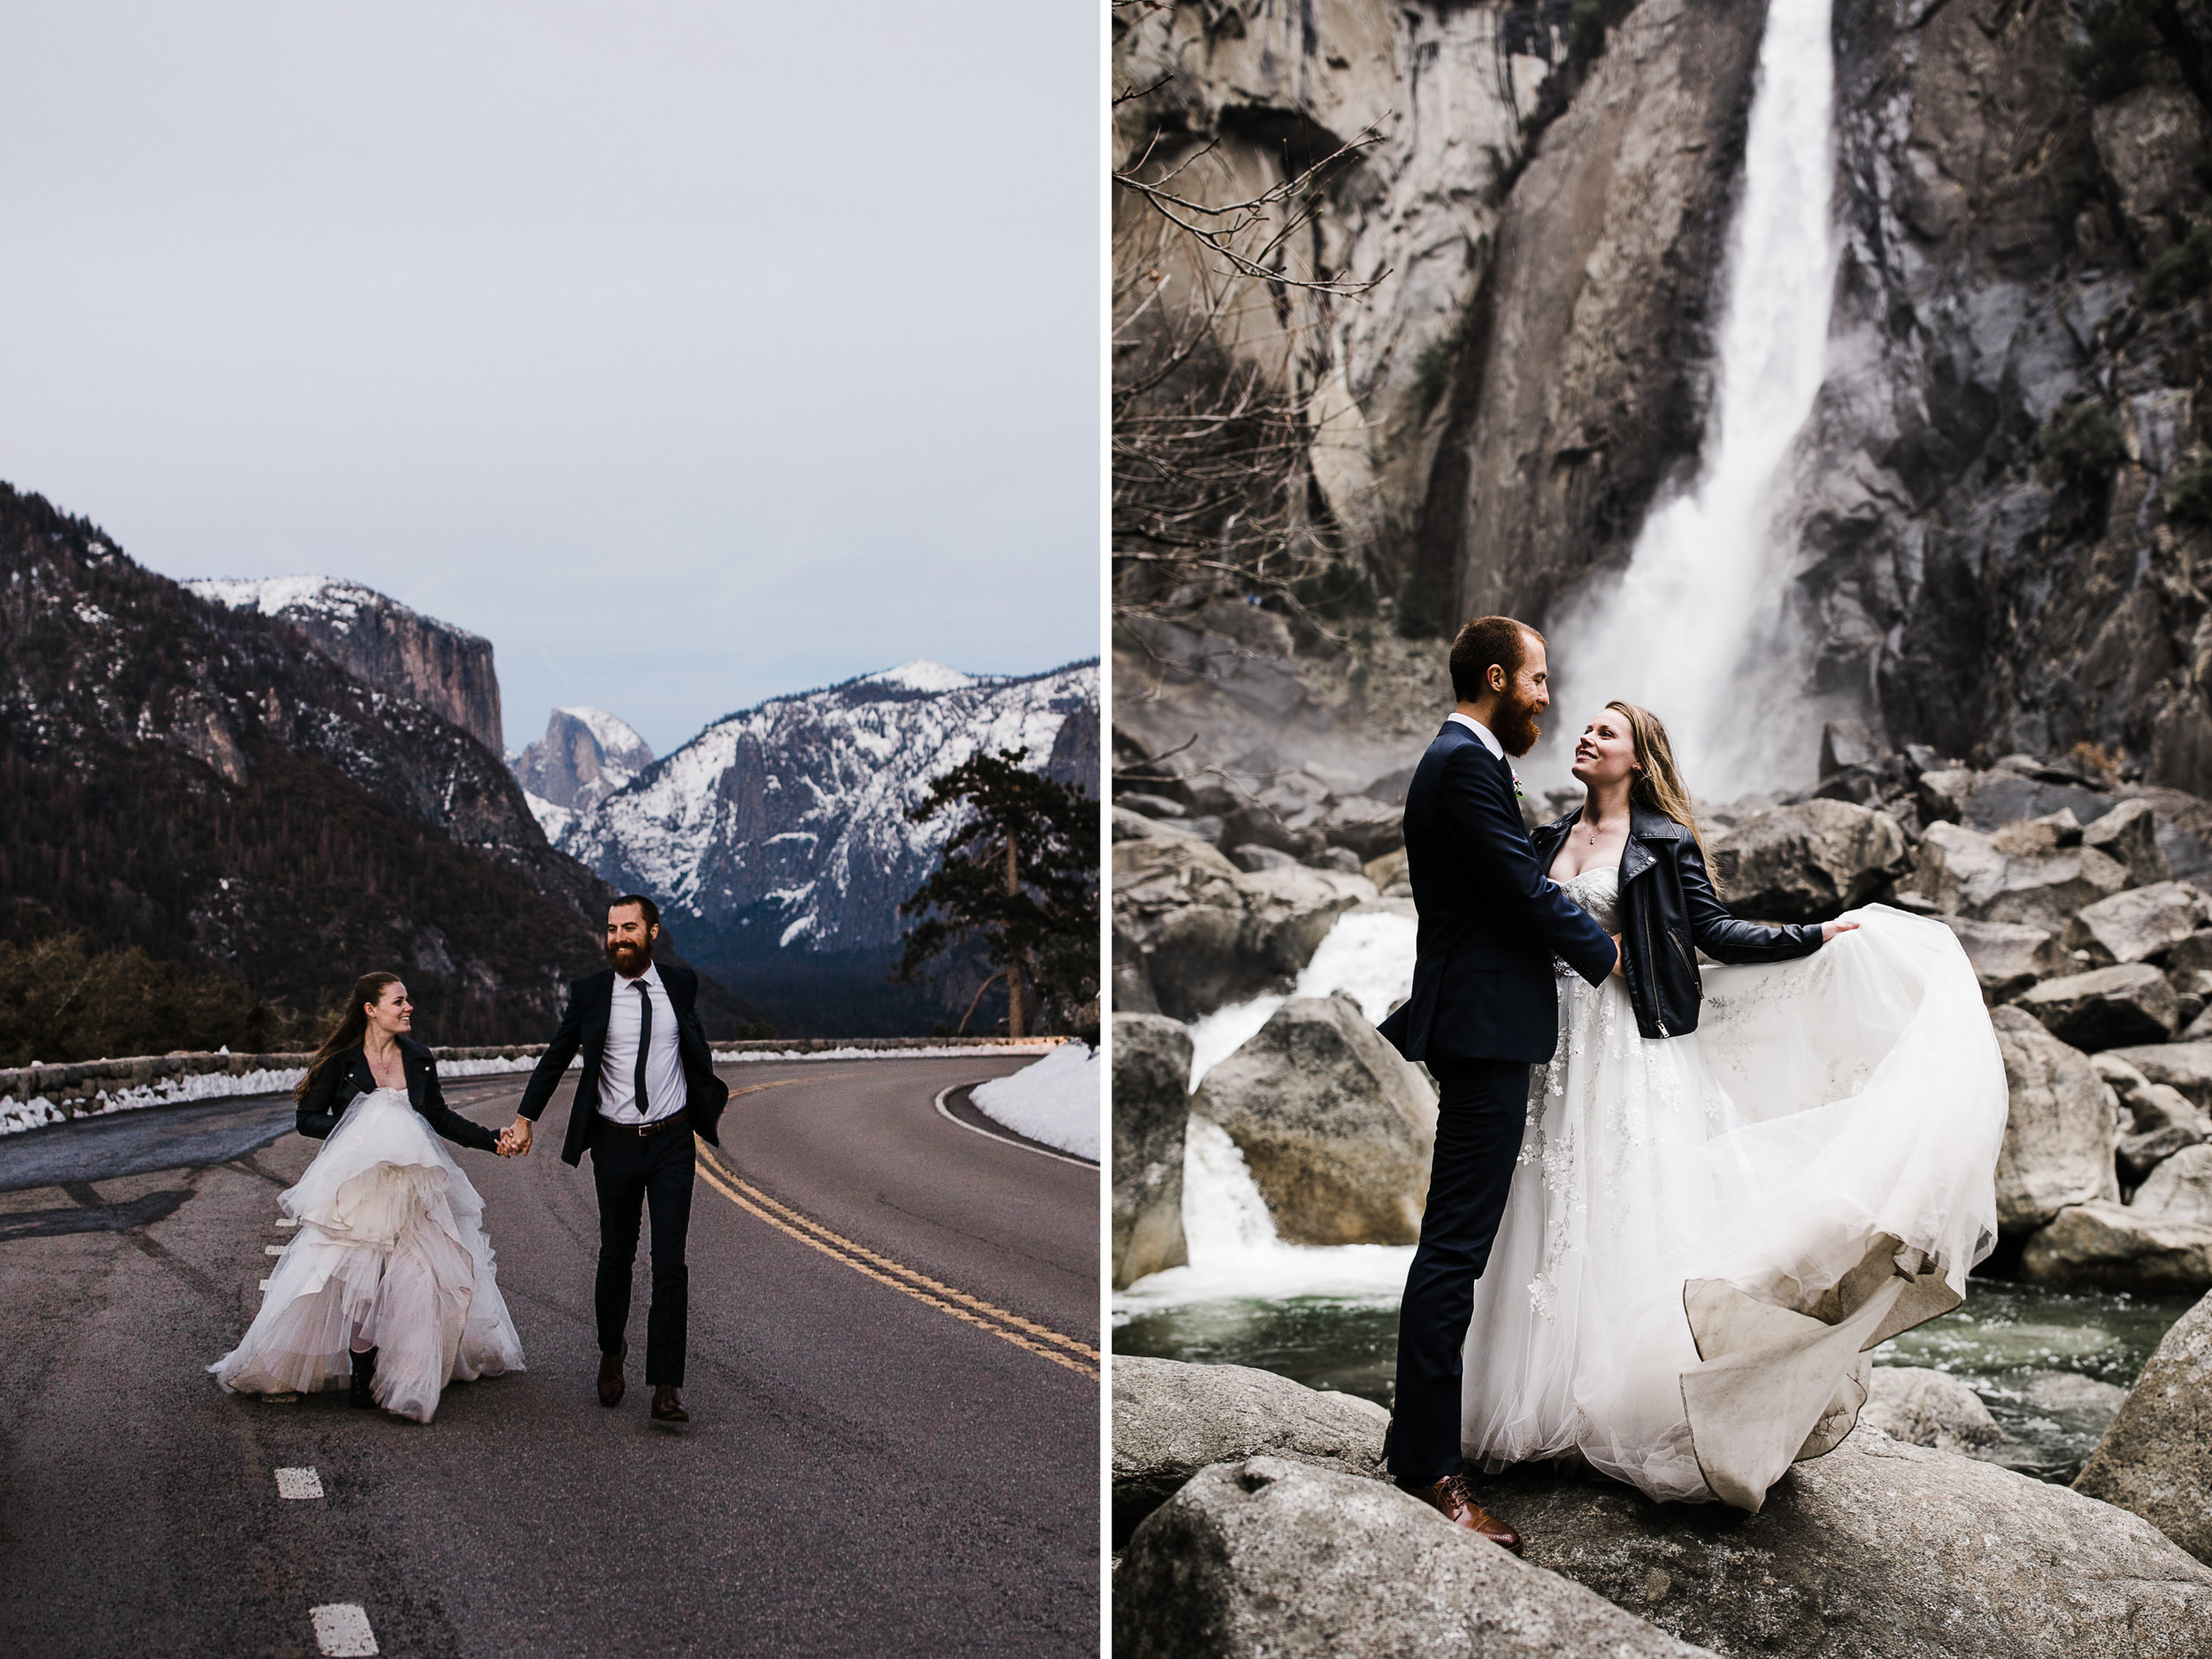 winter elopement ceremony in yosemite national park | The Hearnes Adventure Photography